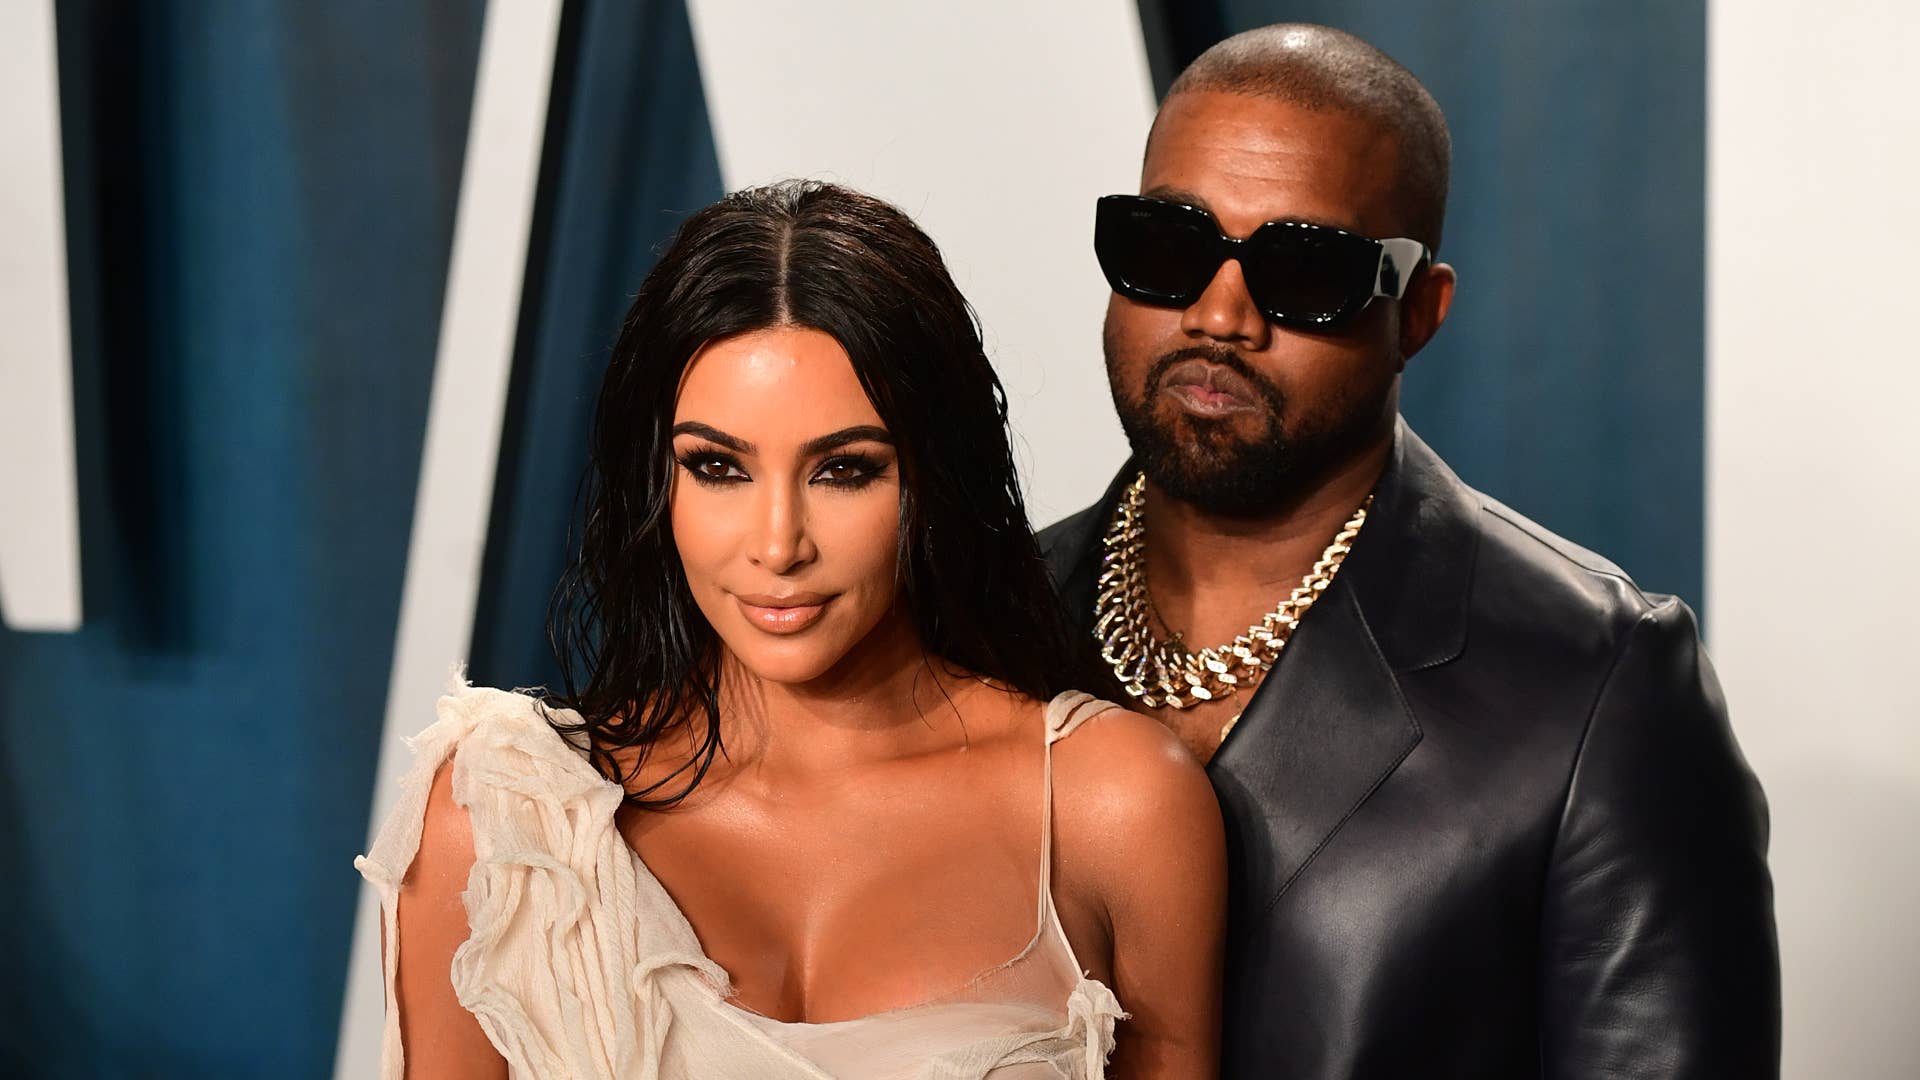 Kim Kardashian and Kanye West are pictured on a red carpet